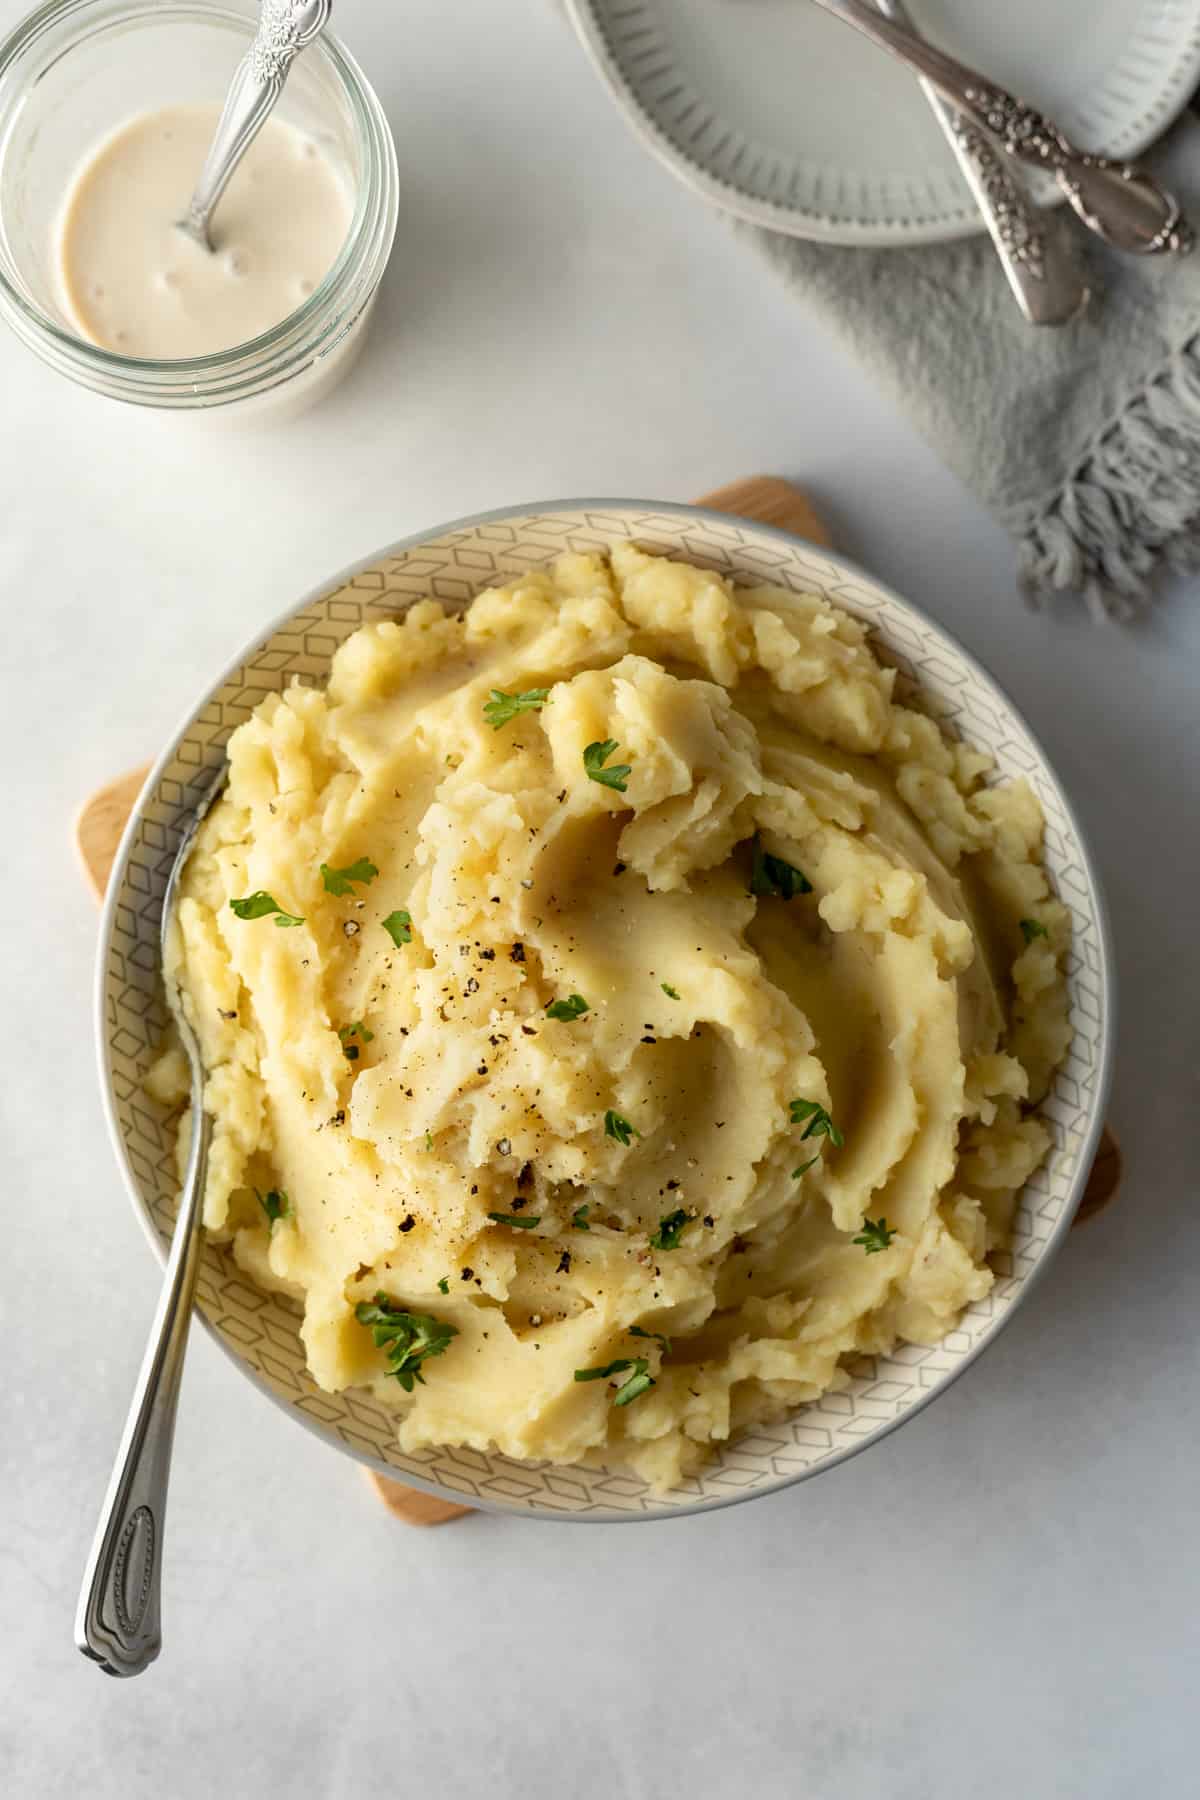 A serving bowl full of creamy, fluffy mashed potatoes.